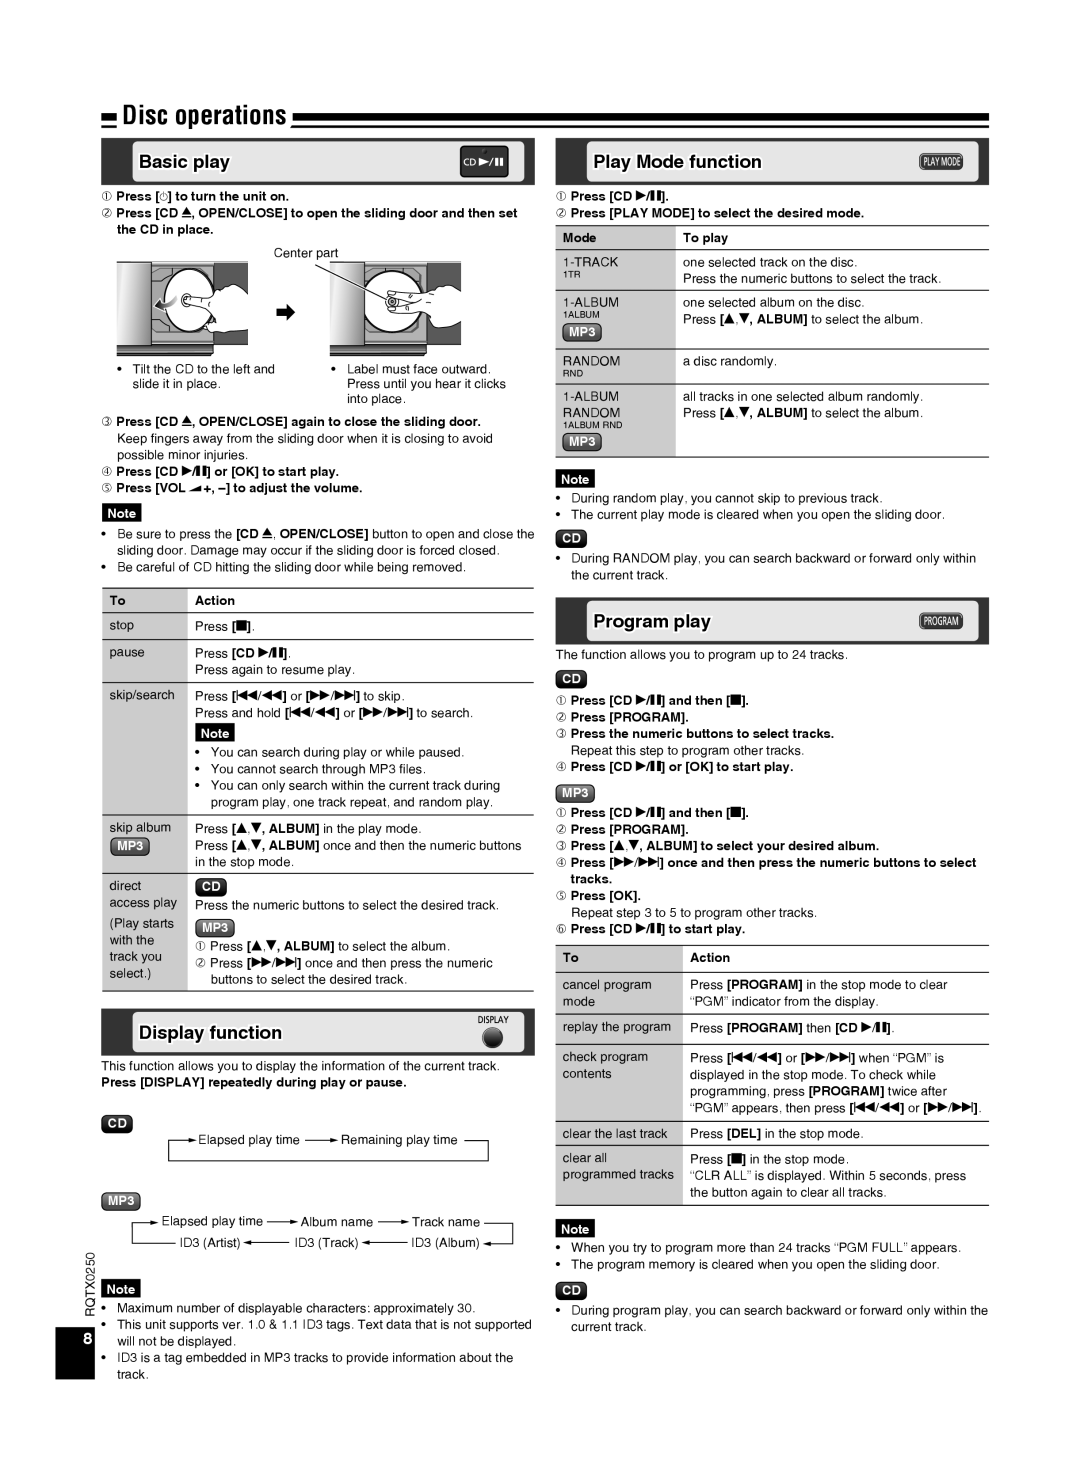 Panasonic SC-HC3 operating instructions Disc operations, Basic play, Play Mode function, Display function, Program play 